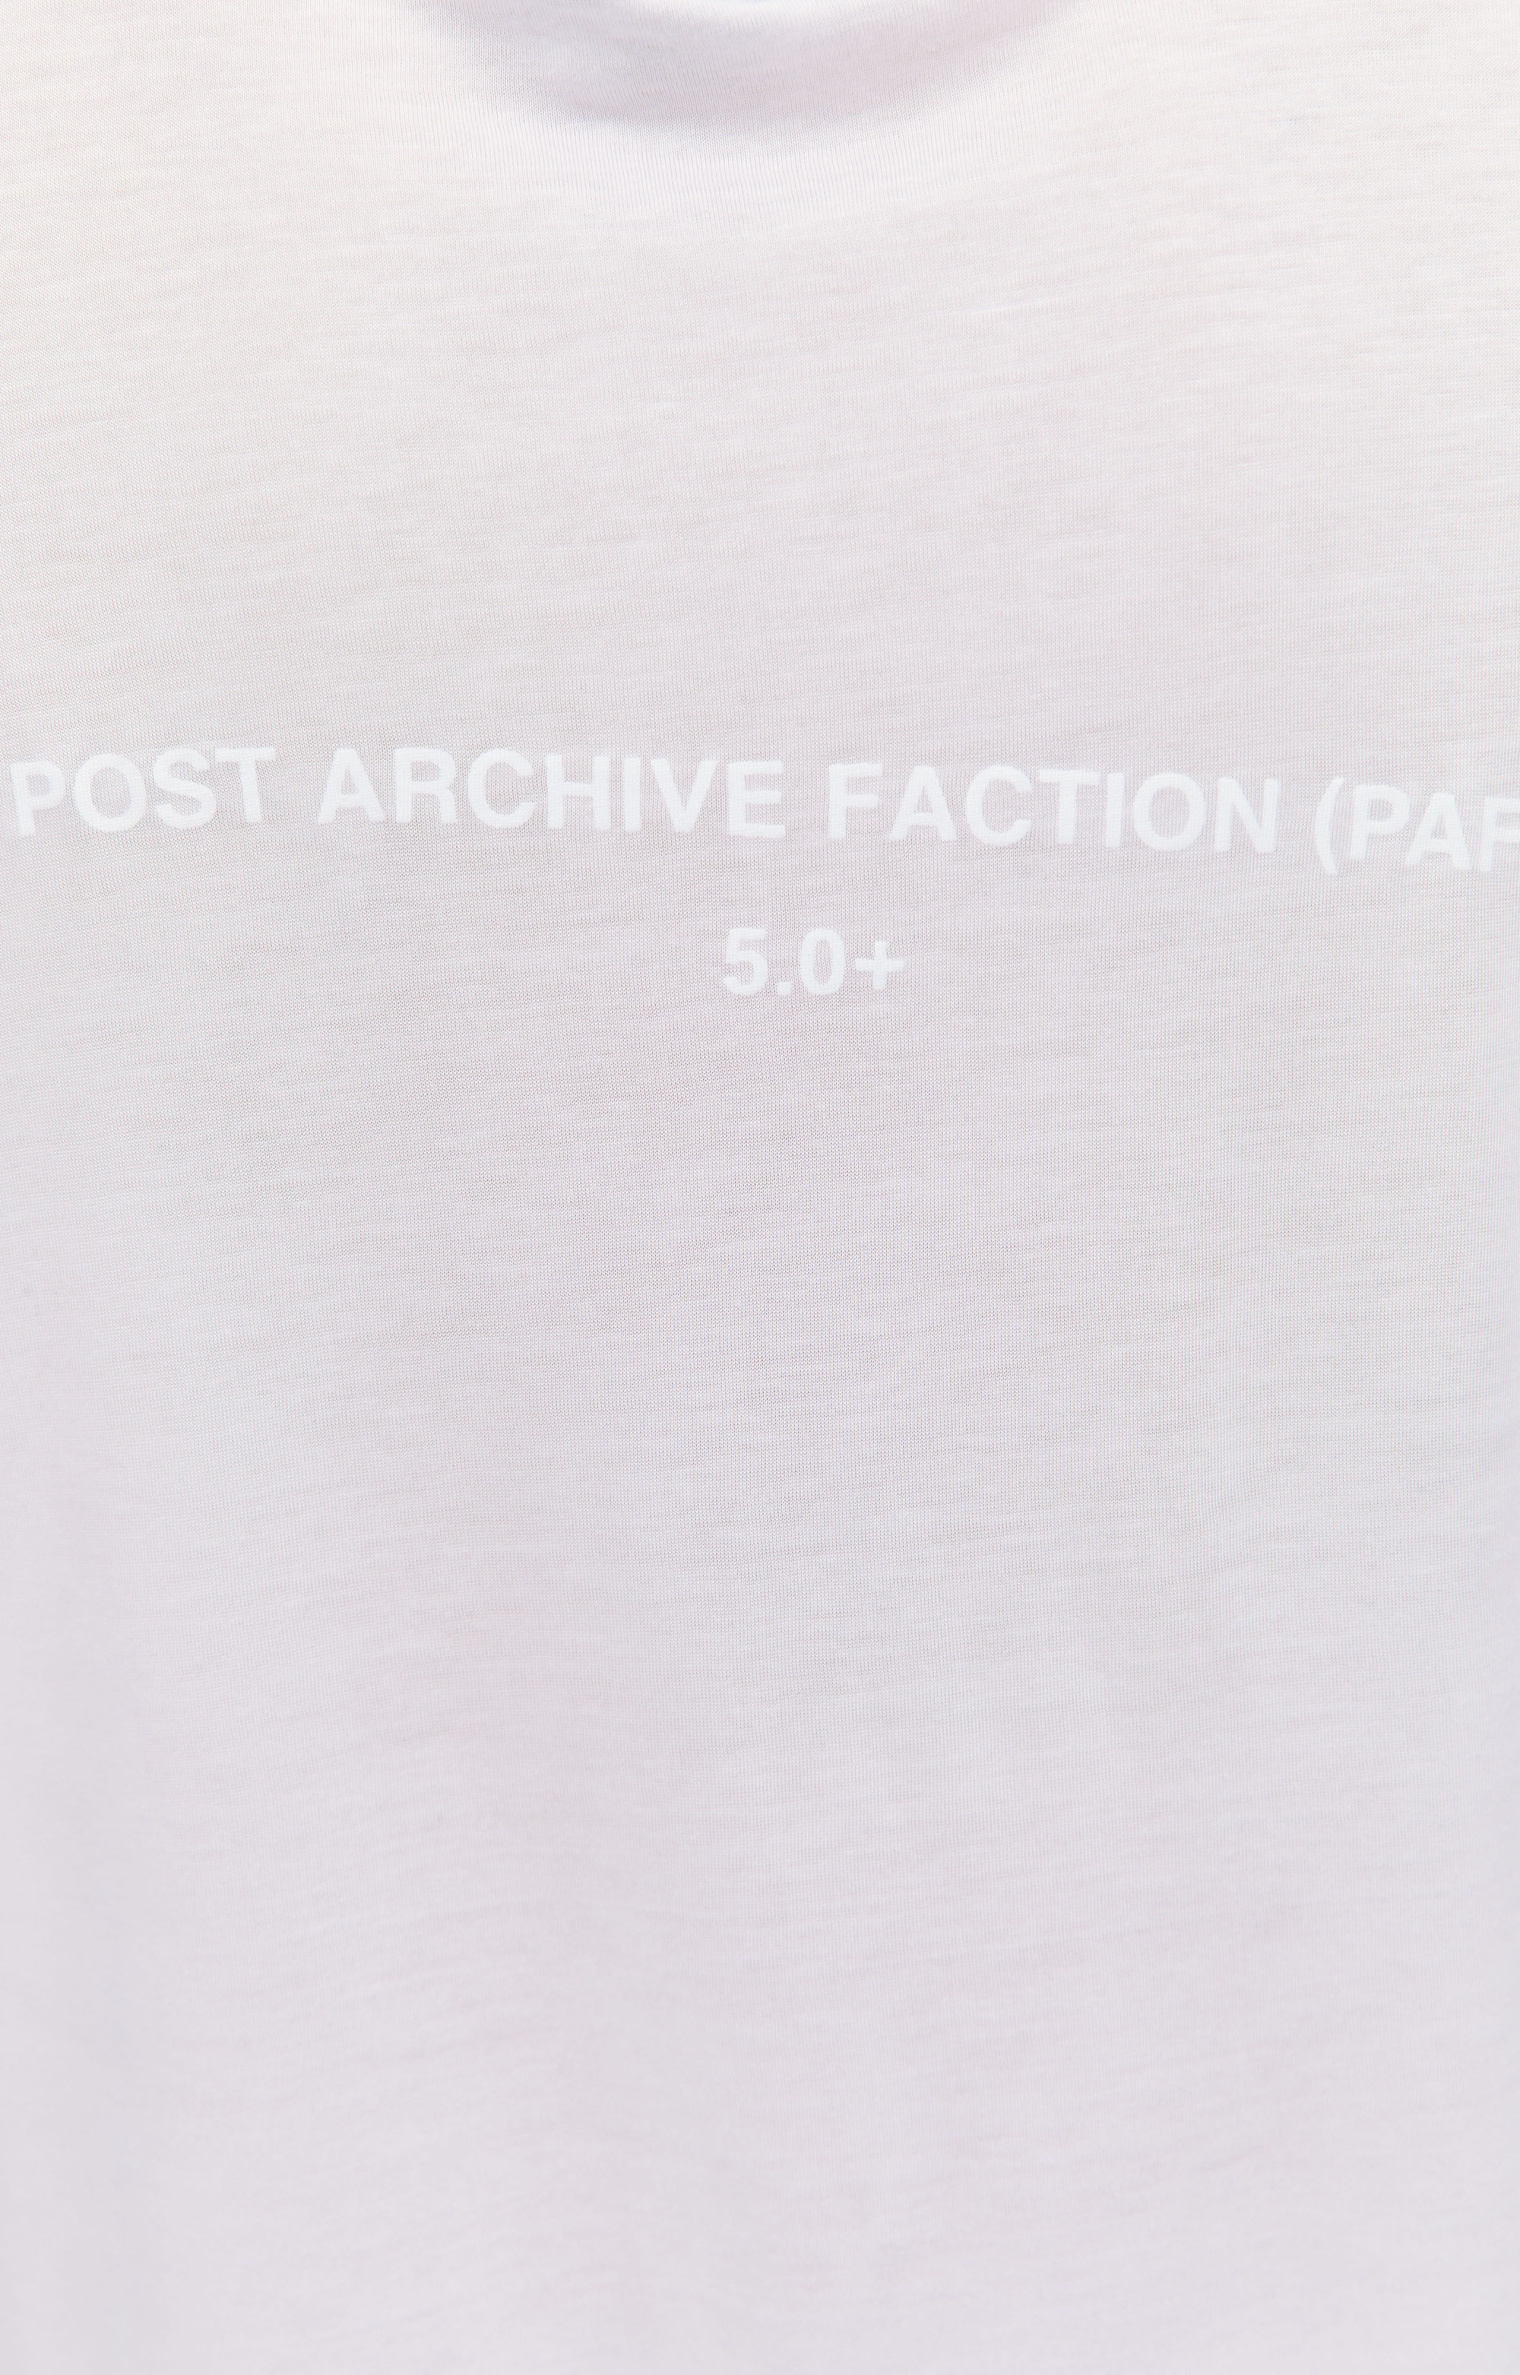 Post Archive Faction White 5.0+ t-shirt with logo